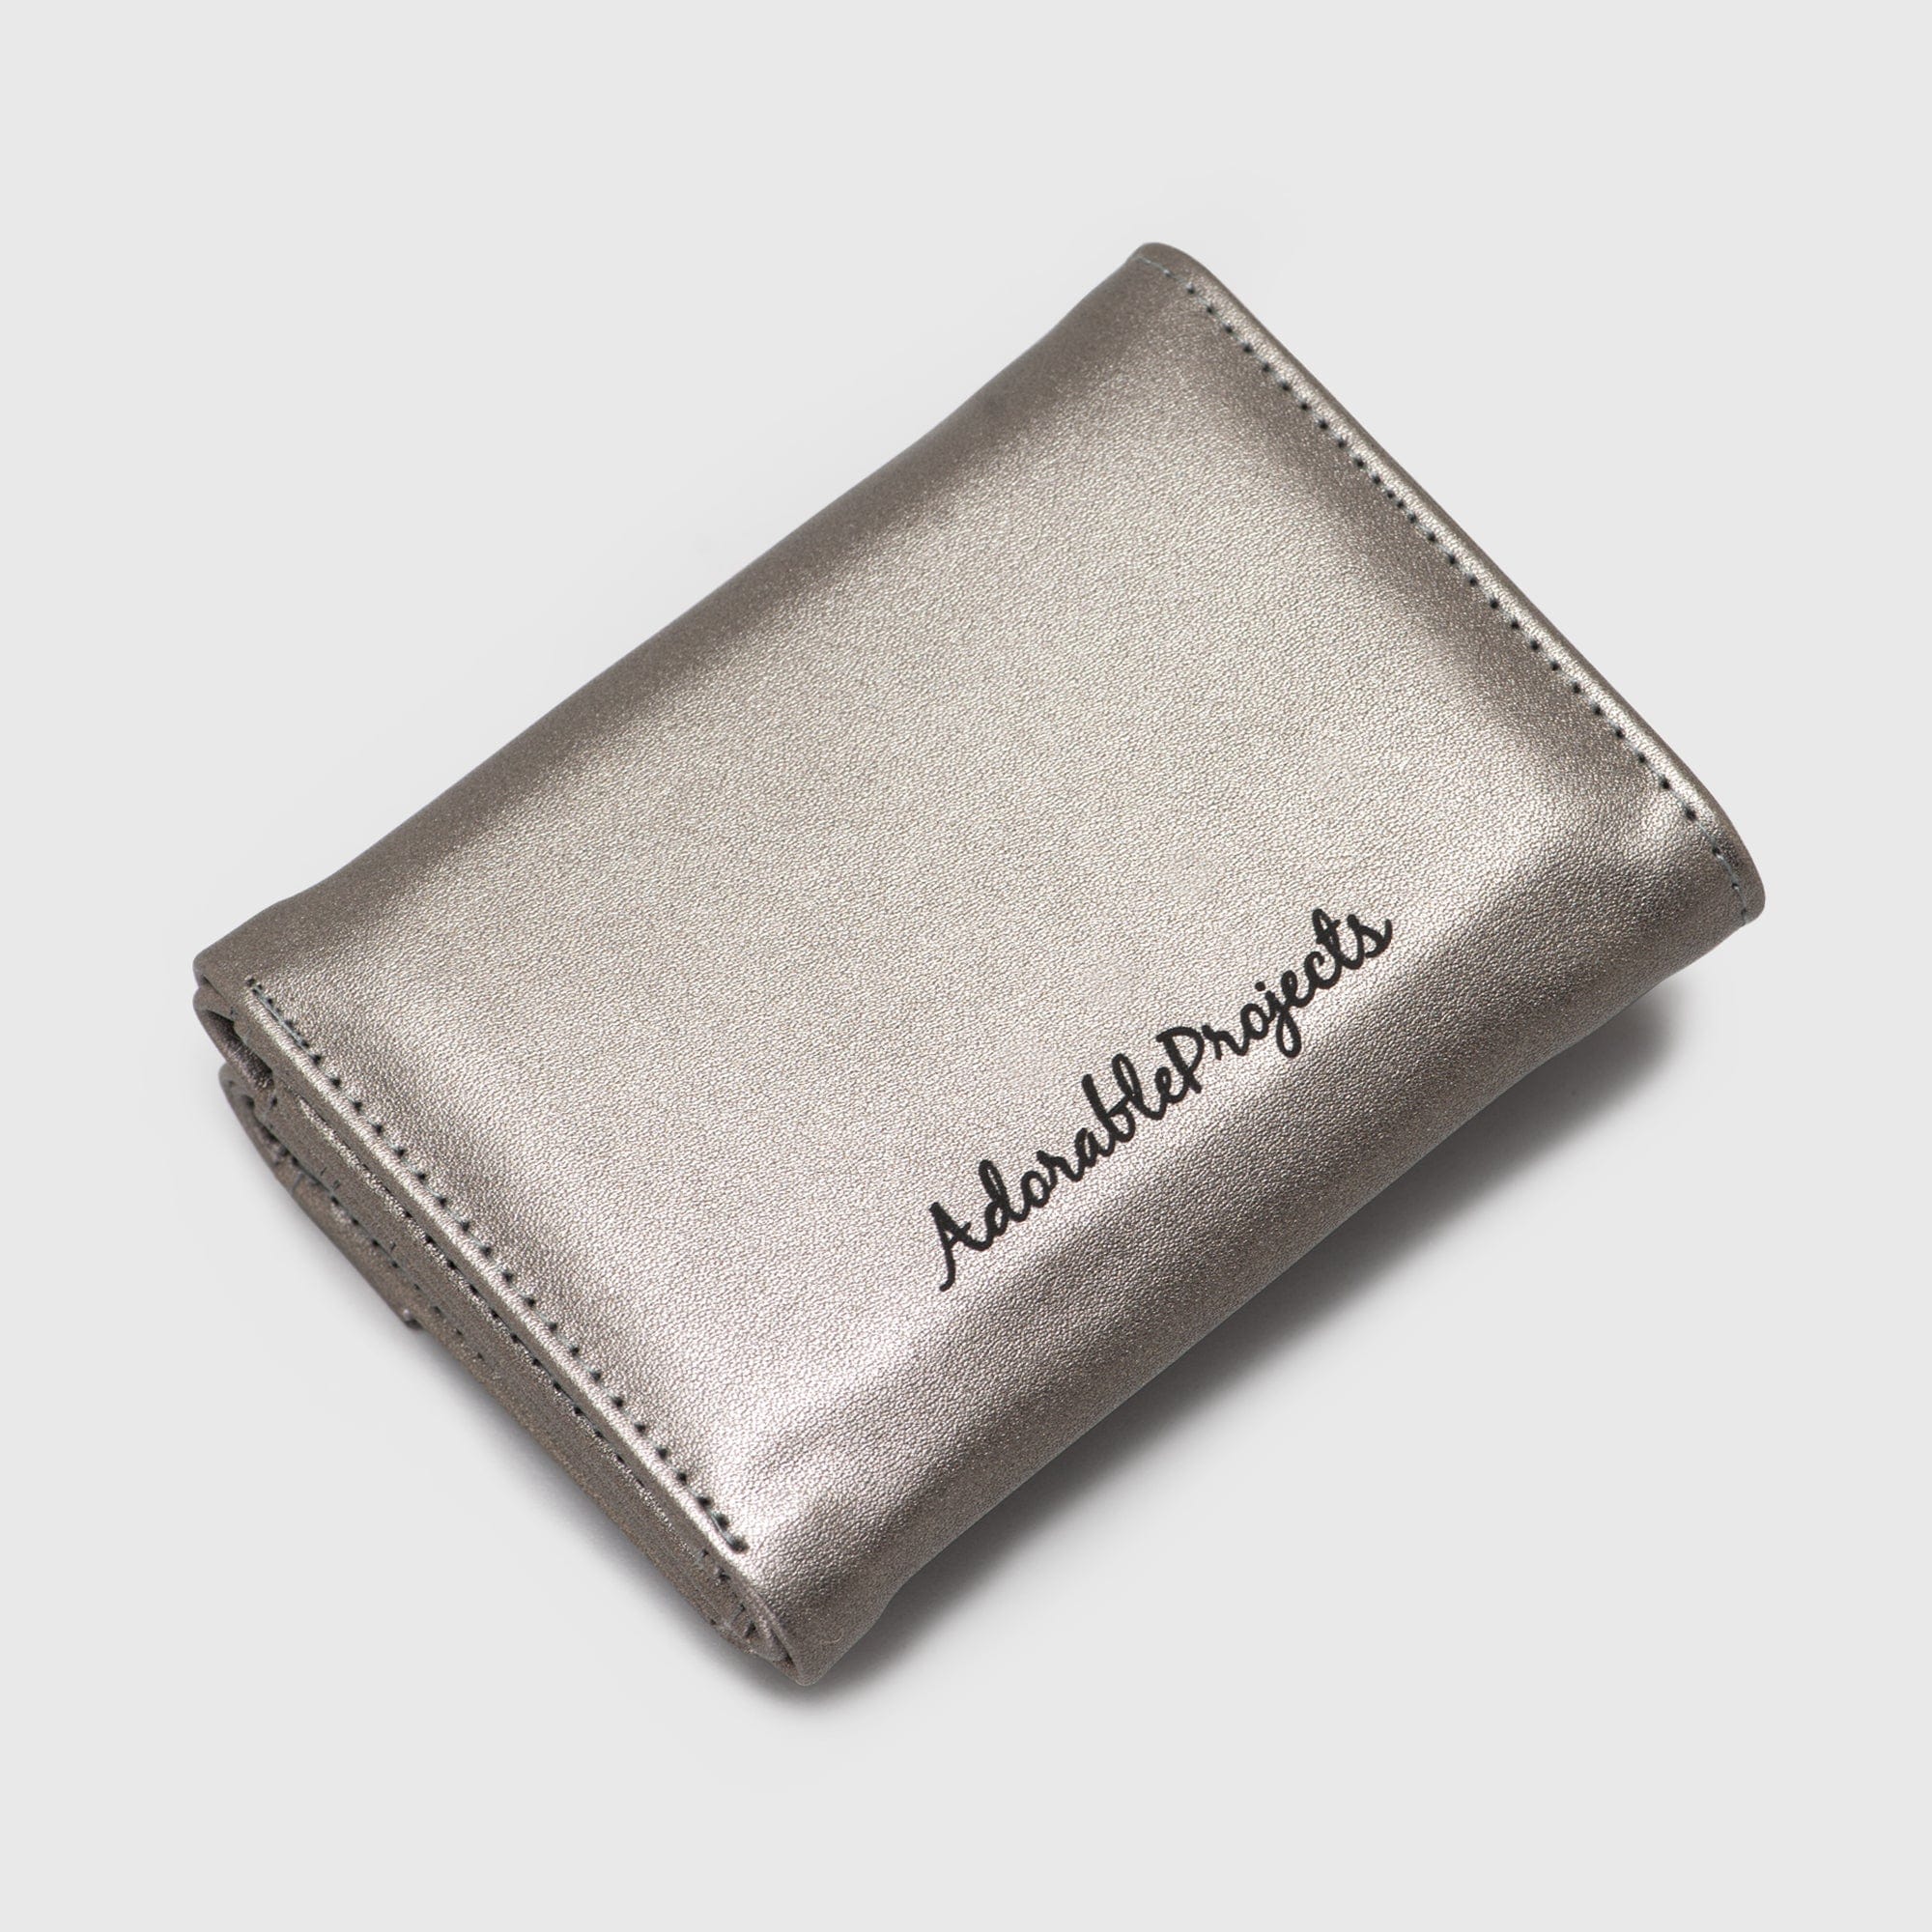 Adorable Projects Official Adorableprojects - Motta Wallet Pewter - Dompet Wanita